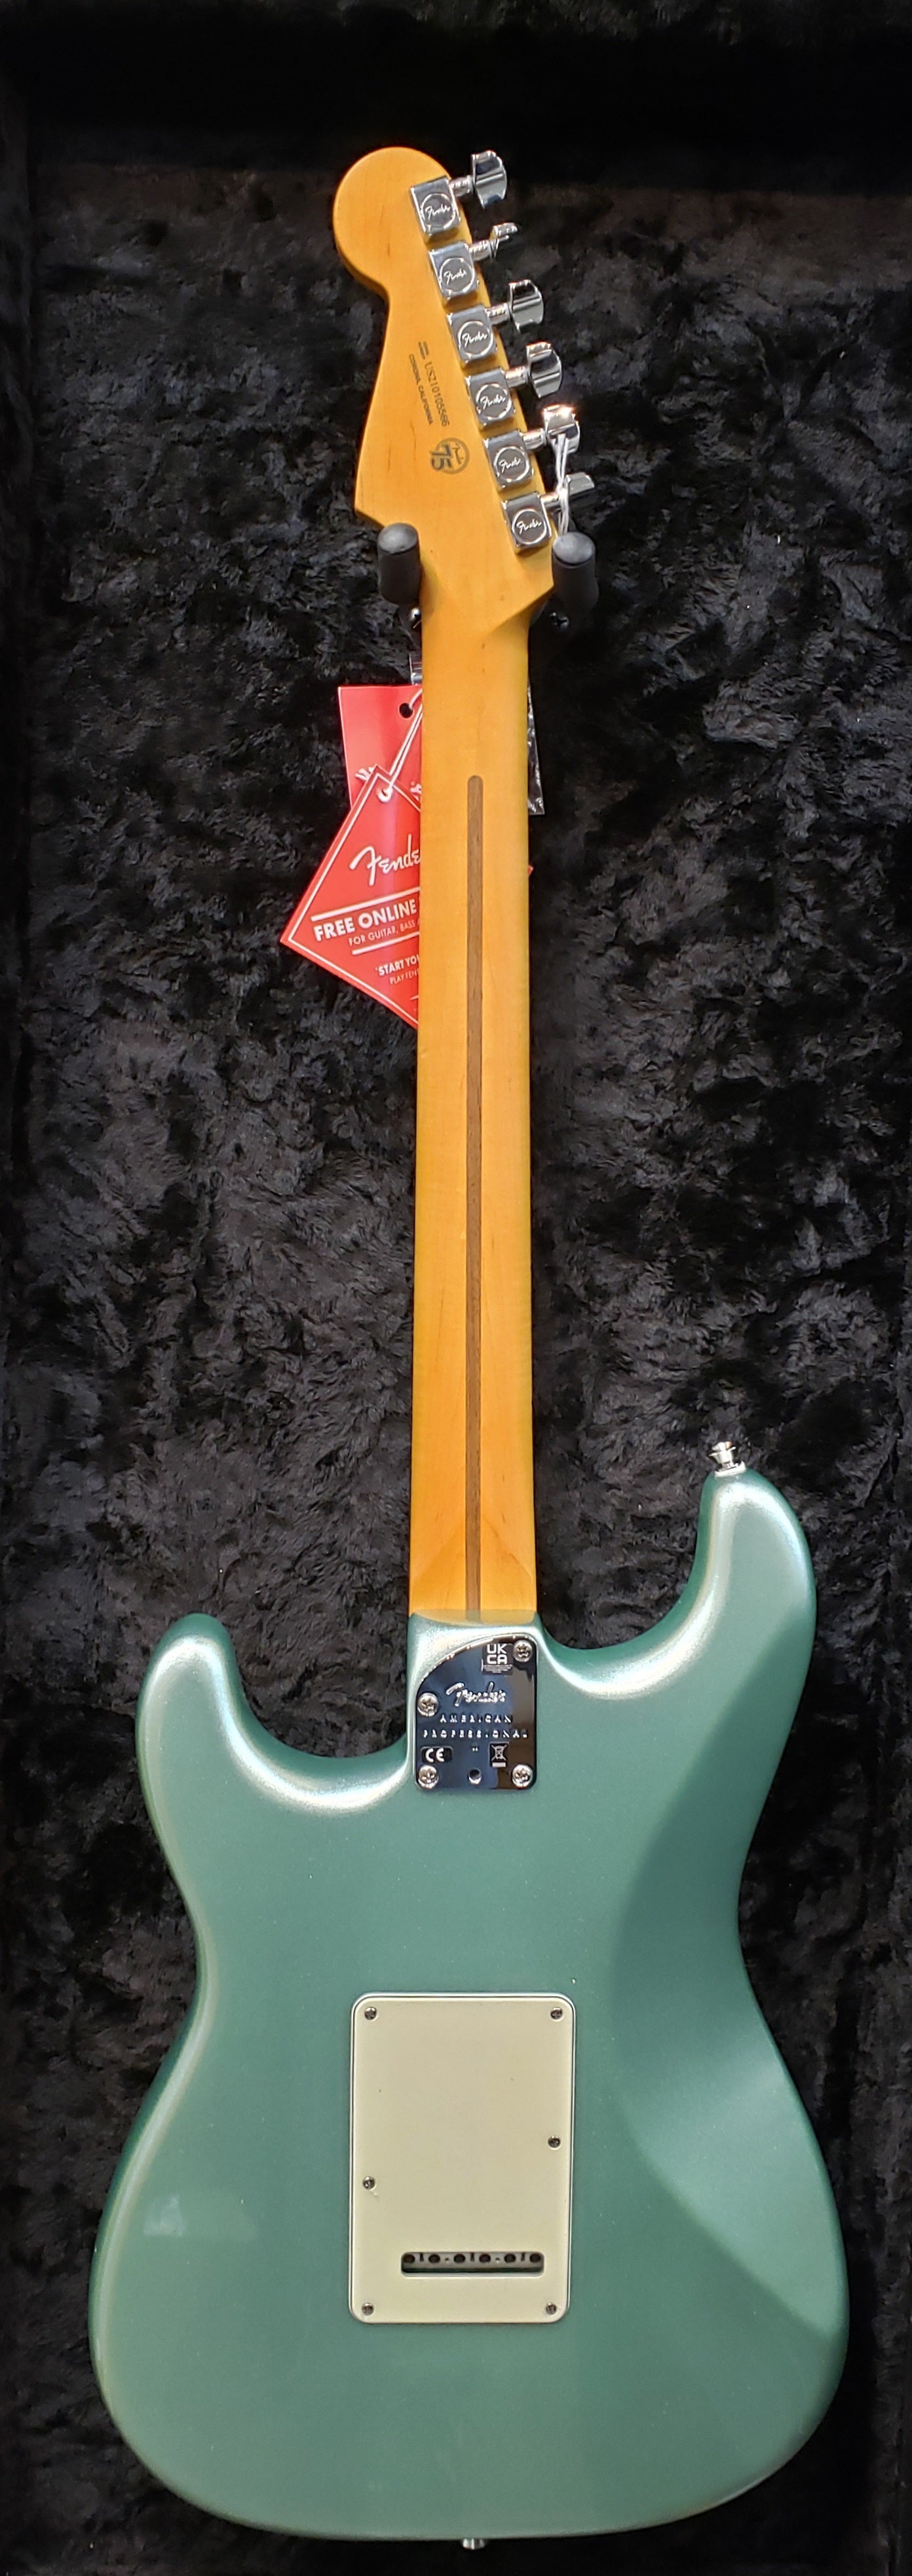 Fender American Professional II Stratocaster HSS Maple Fingerboard Mystic Surf Green F-0113912718 SERIAL NUMBER US210105566 - 7.6 LBS